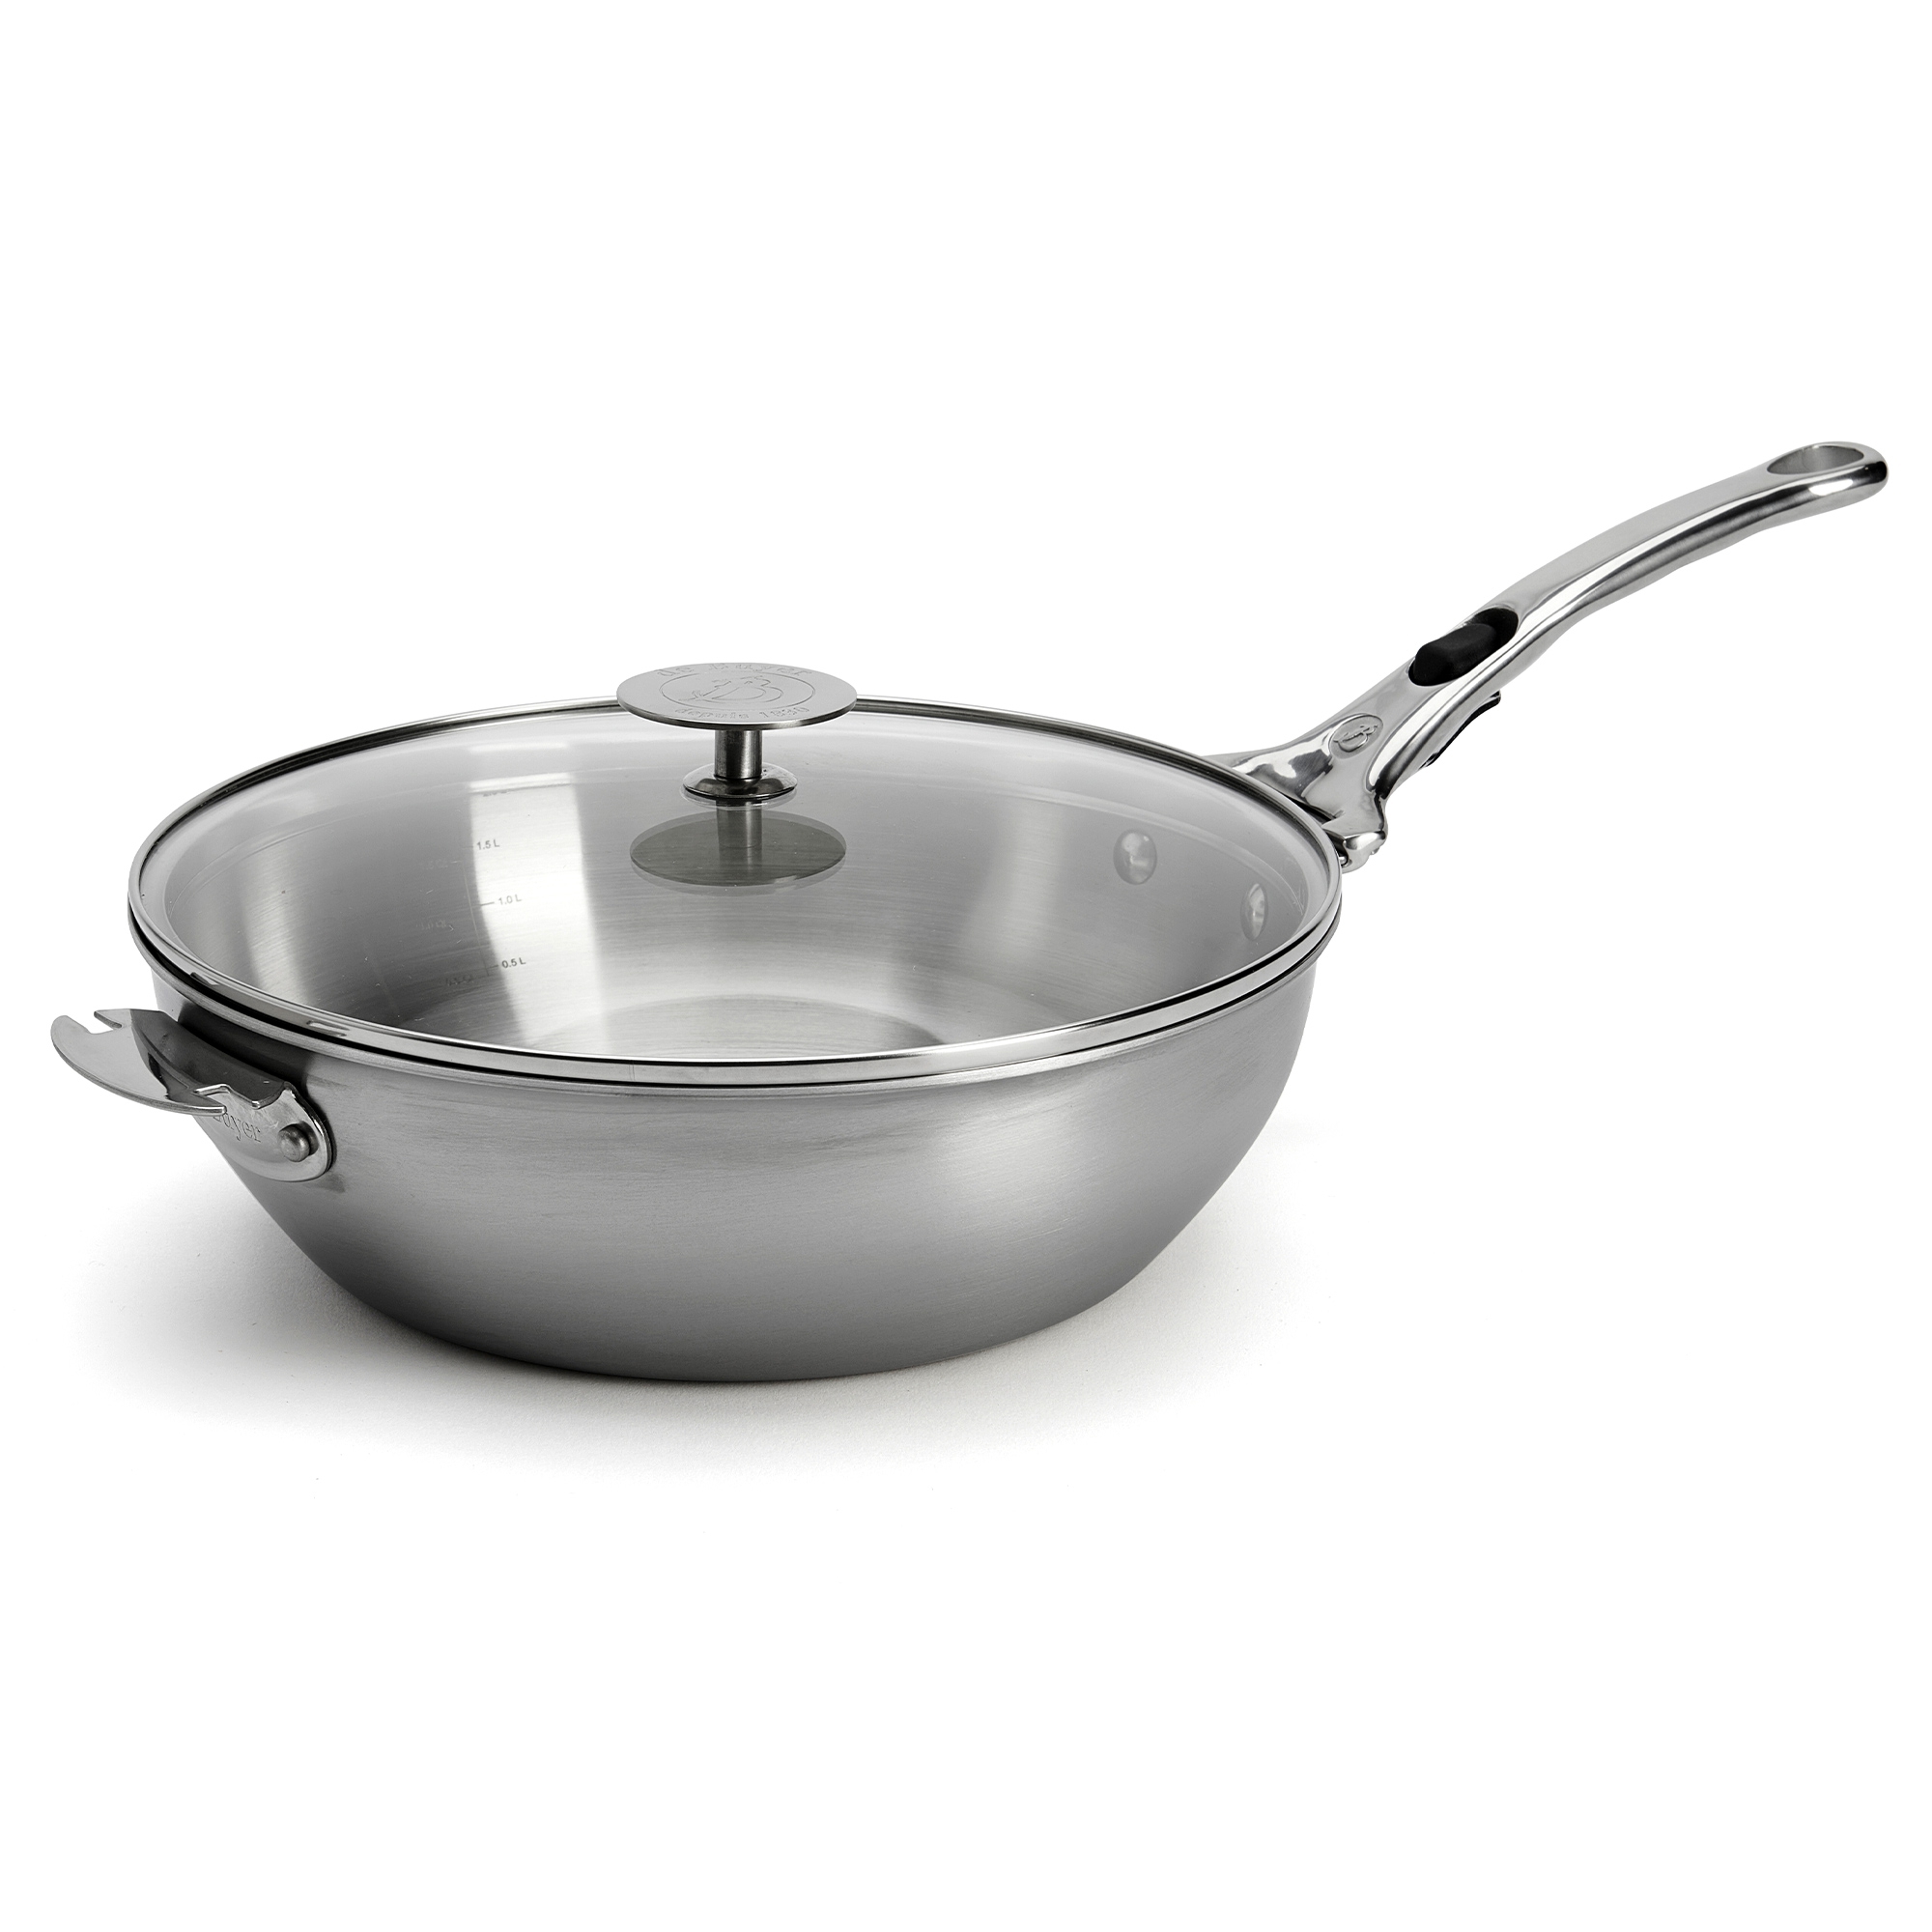 de Buyer - Stainless steel Rounded Sauté Pan 24 cm - ALCHIMY LOQY